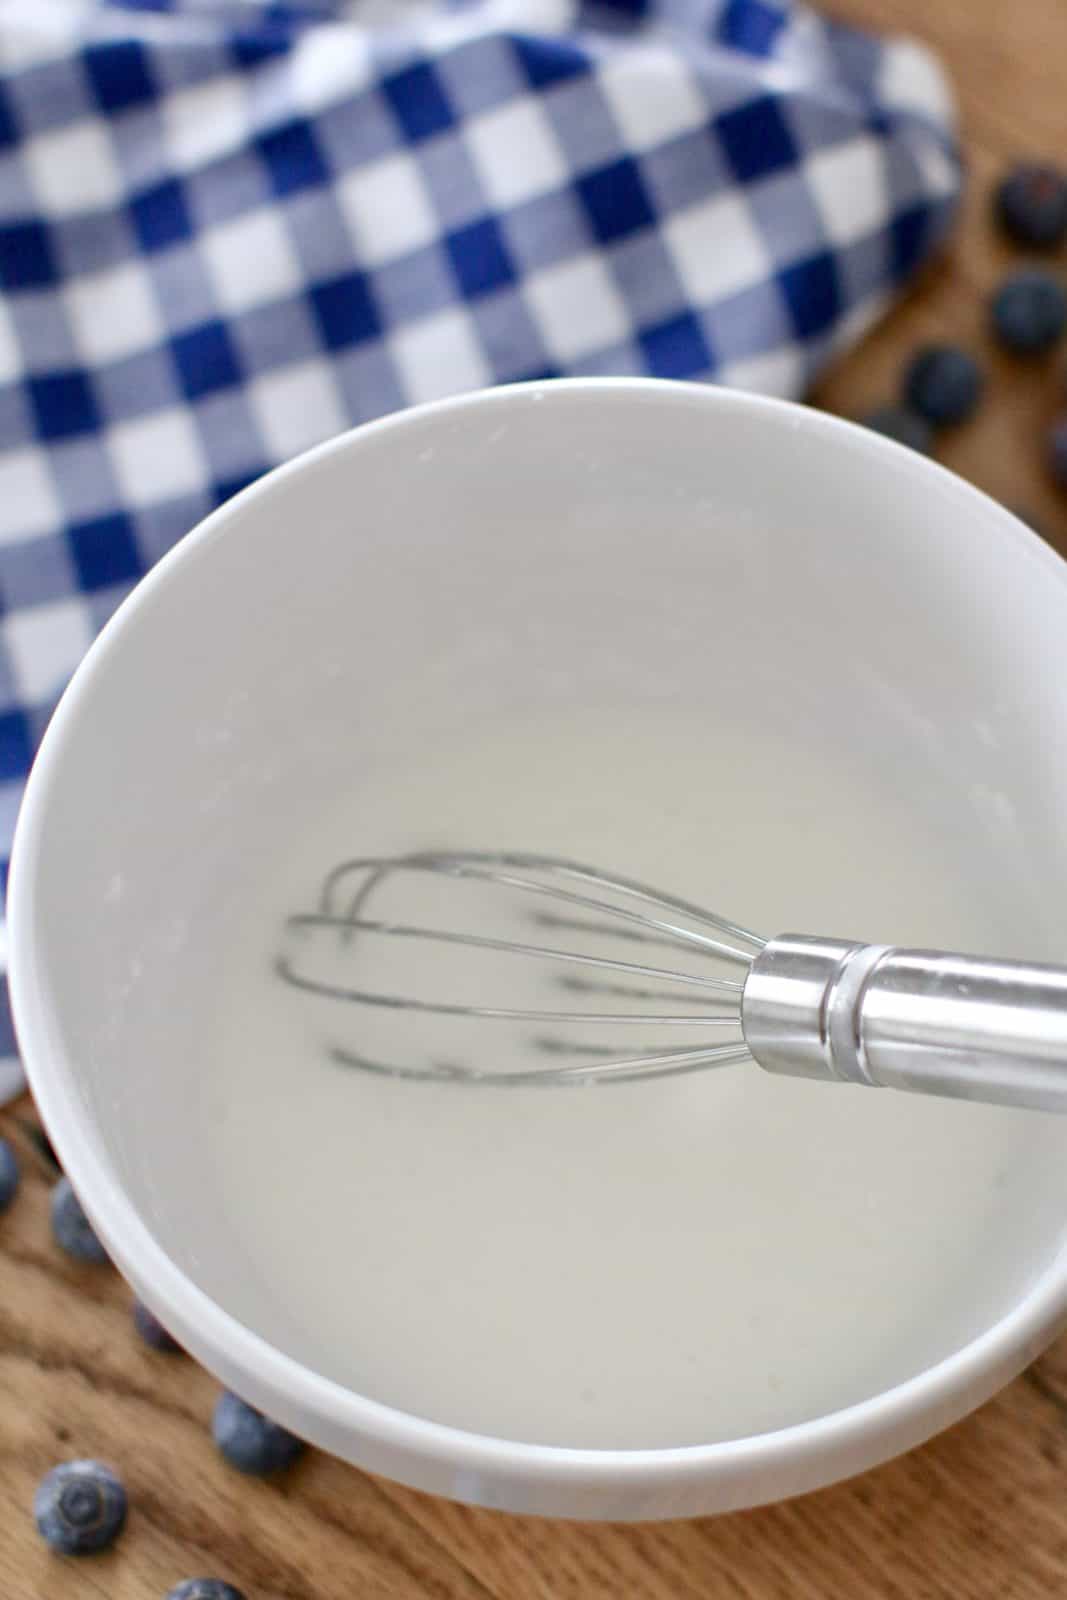 powdered sugar and milk whisked together in a small, white bowl.